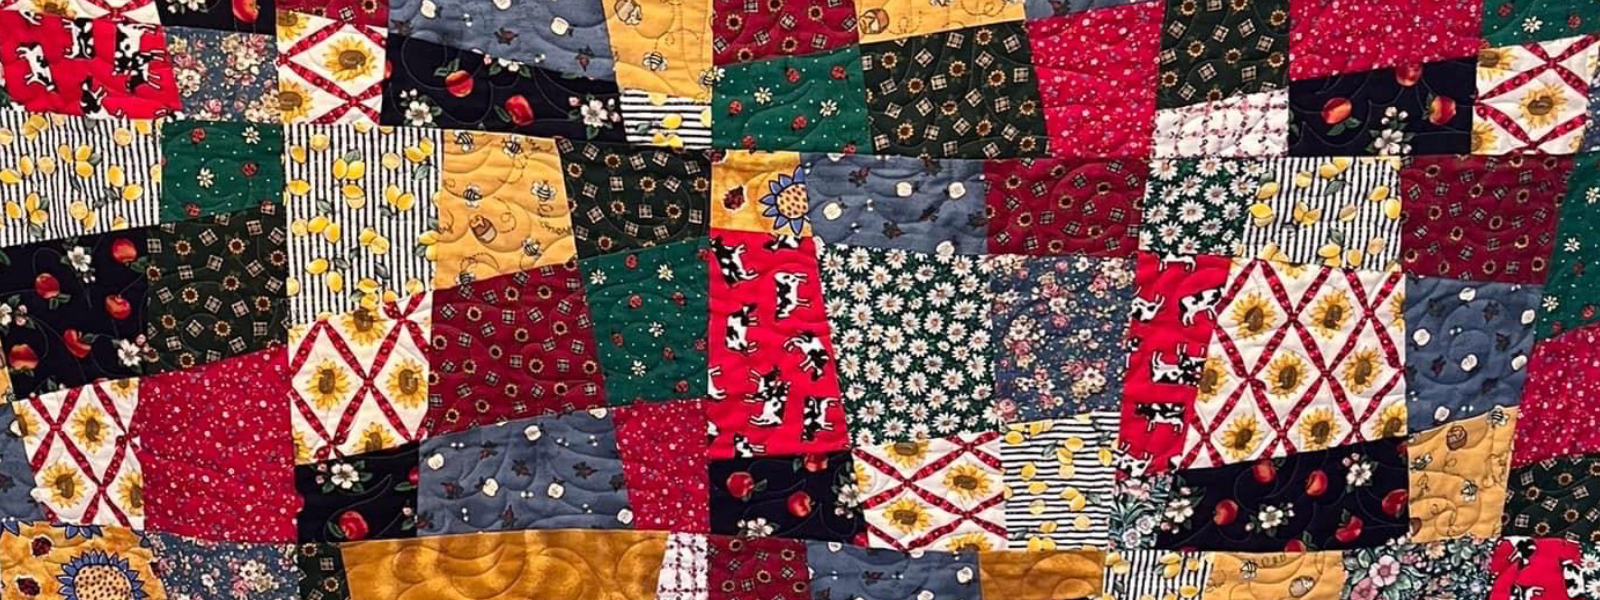 Patchwork Quilt donated to Domini Farm